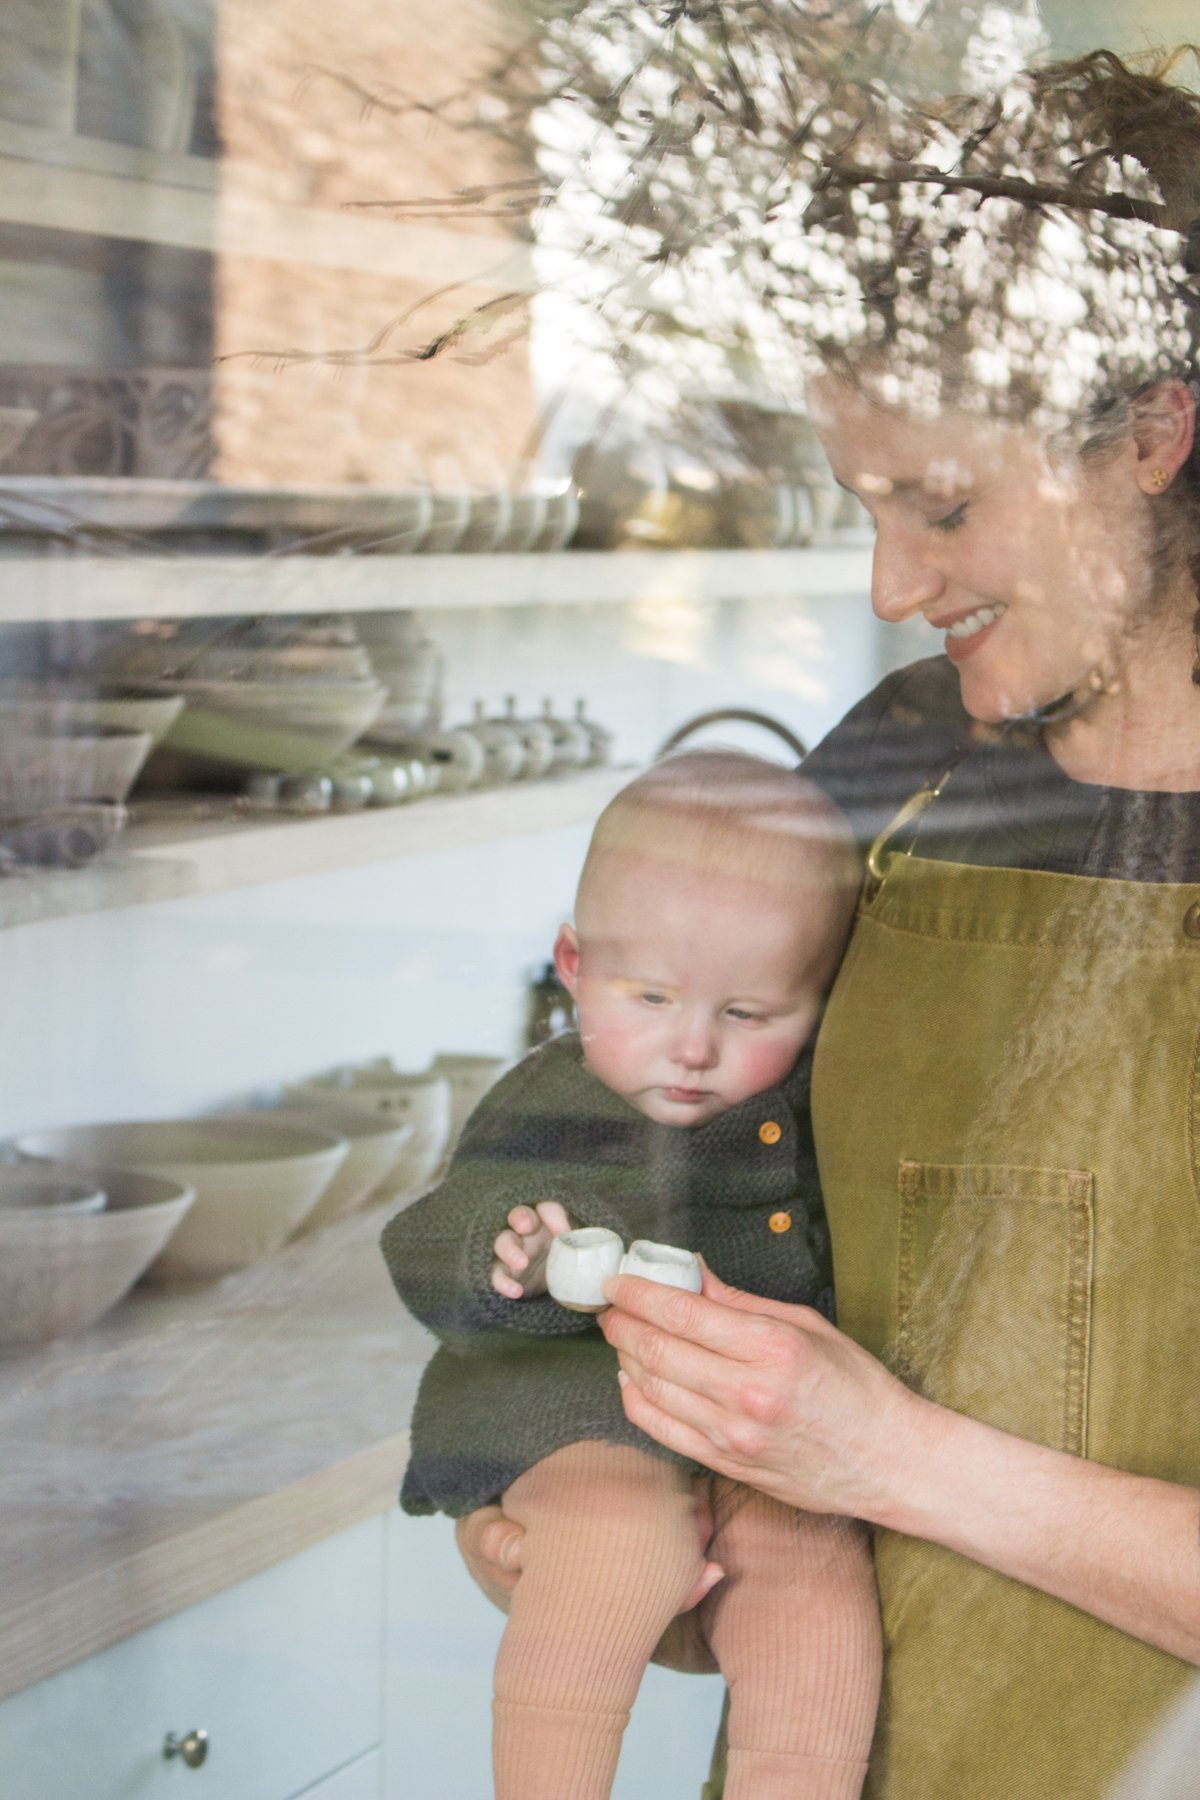 Maker Katie Coston of Illyria Pottery with her baby in her Oxfordshire studio